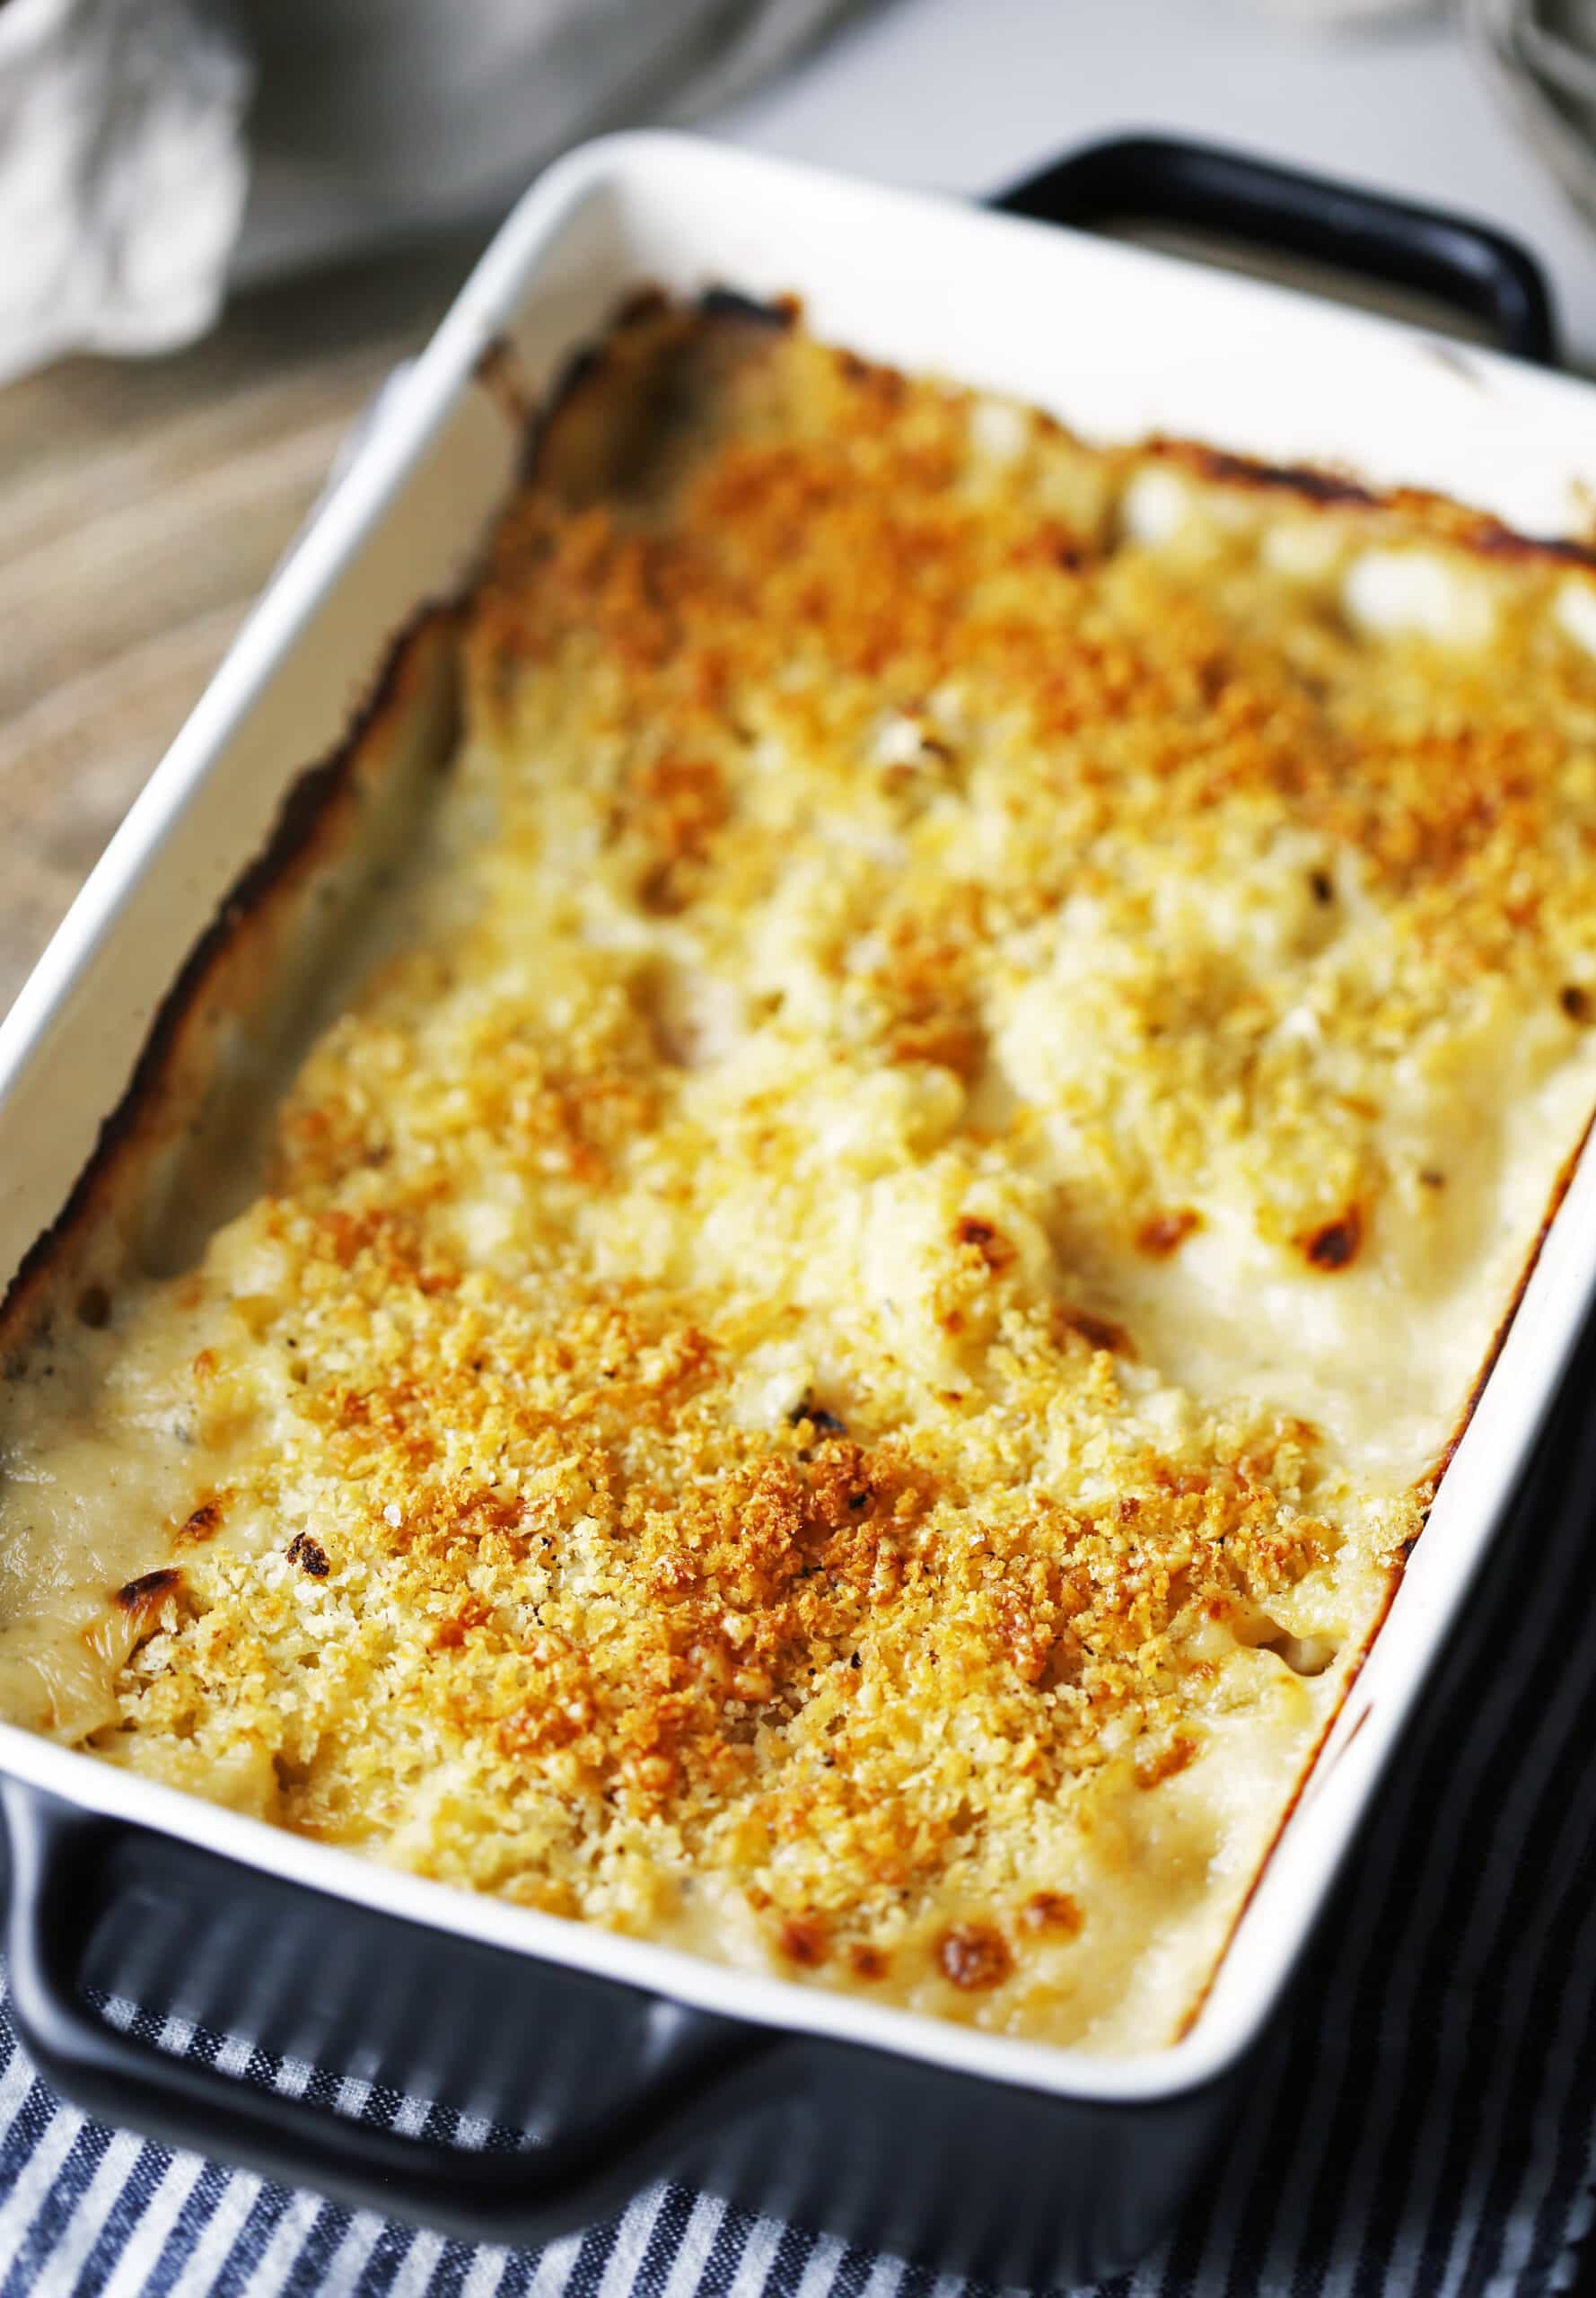 Baked cauliflower gratin with a crunchy panko topping in a black casserole dish.